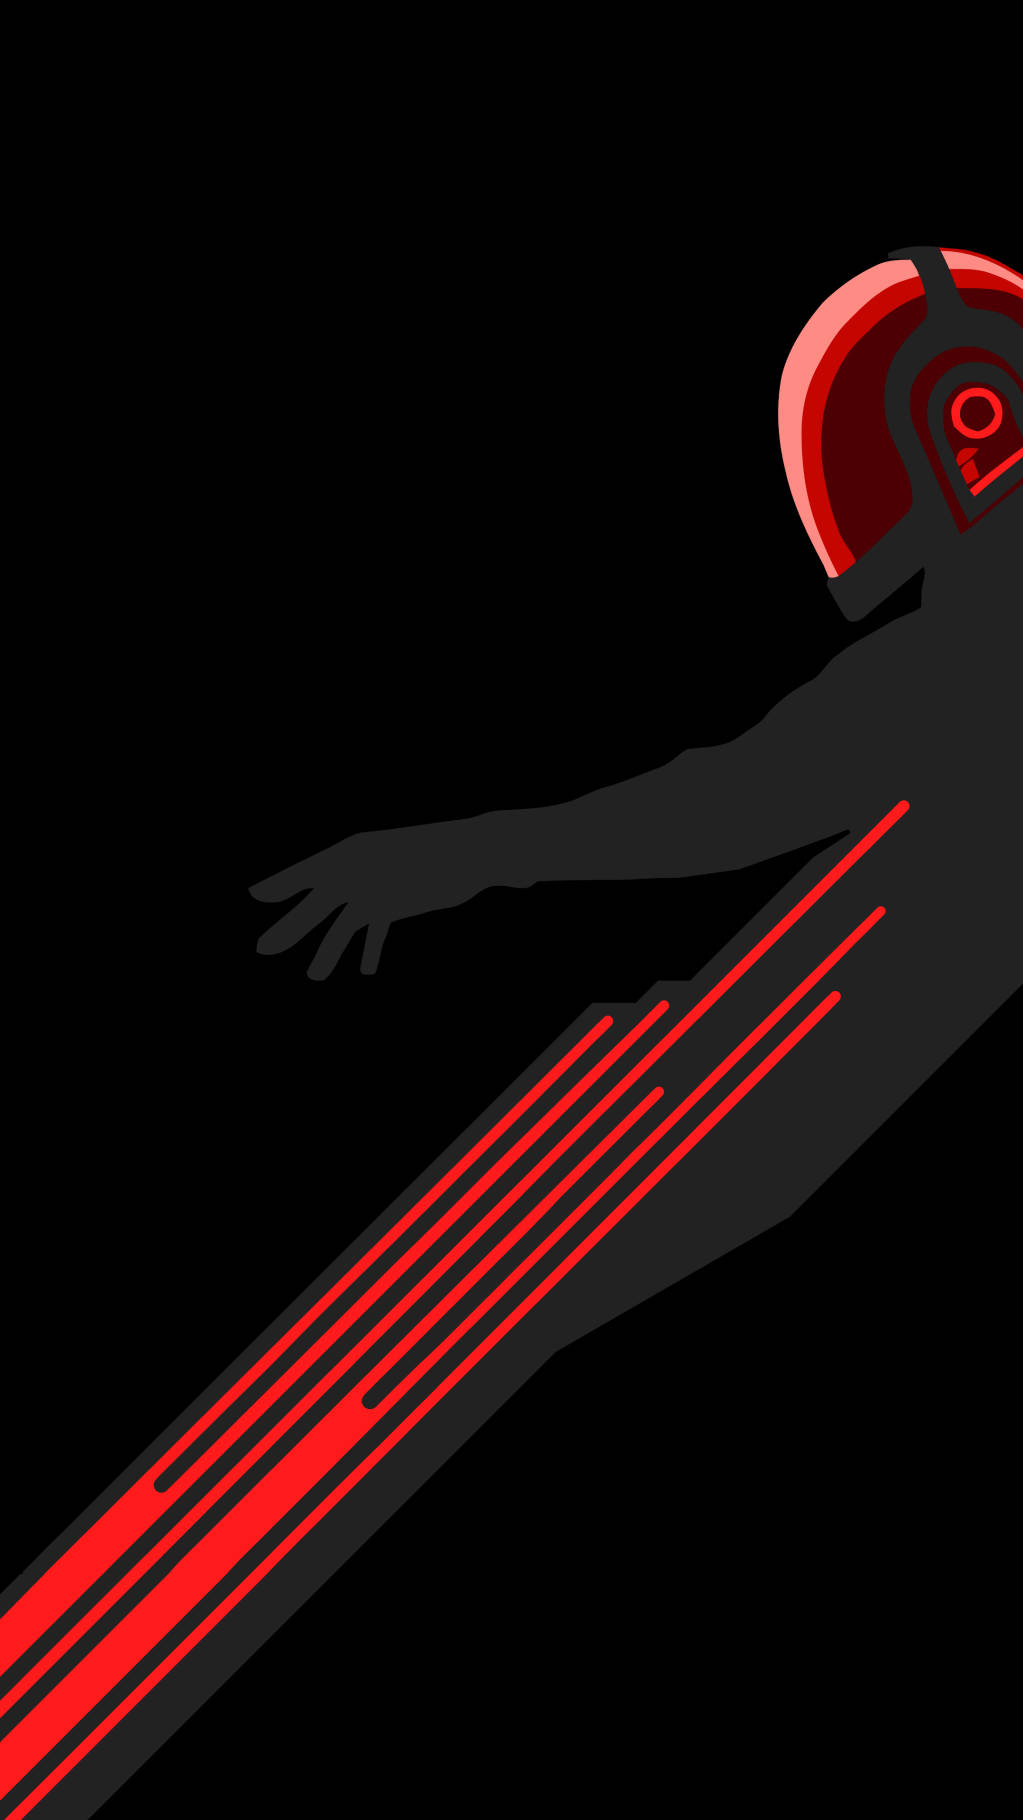 Note 8 Red And Black Vector Art Wallpaper